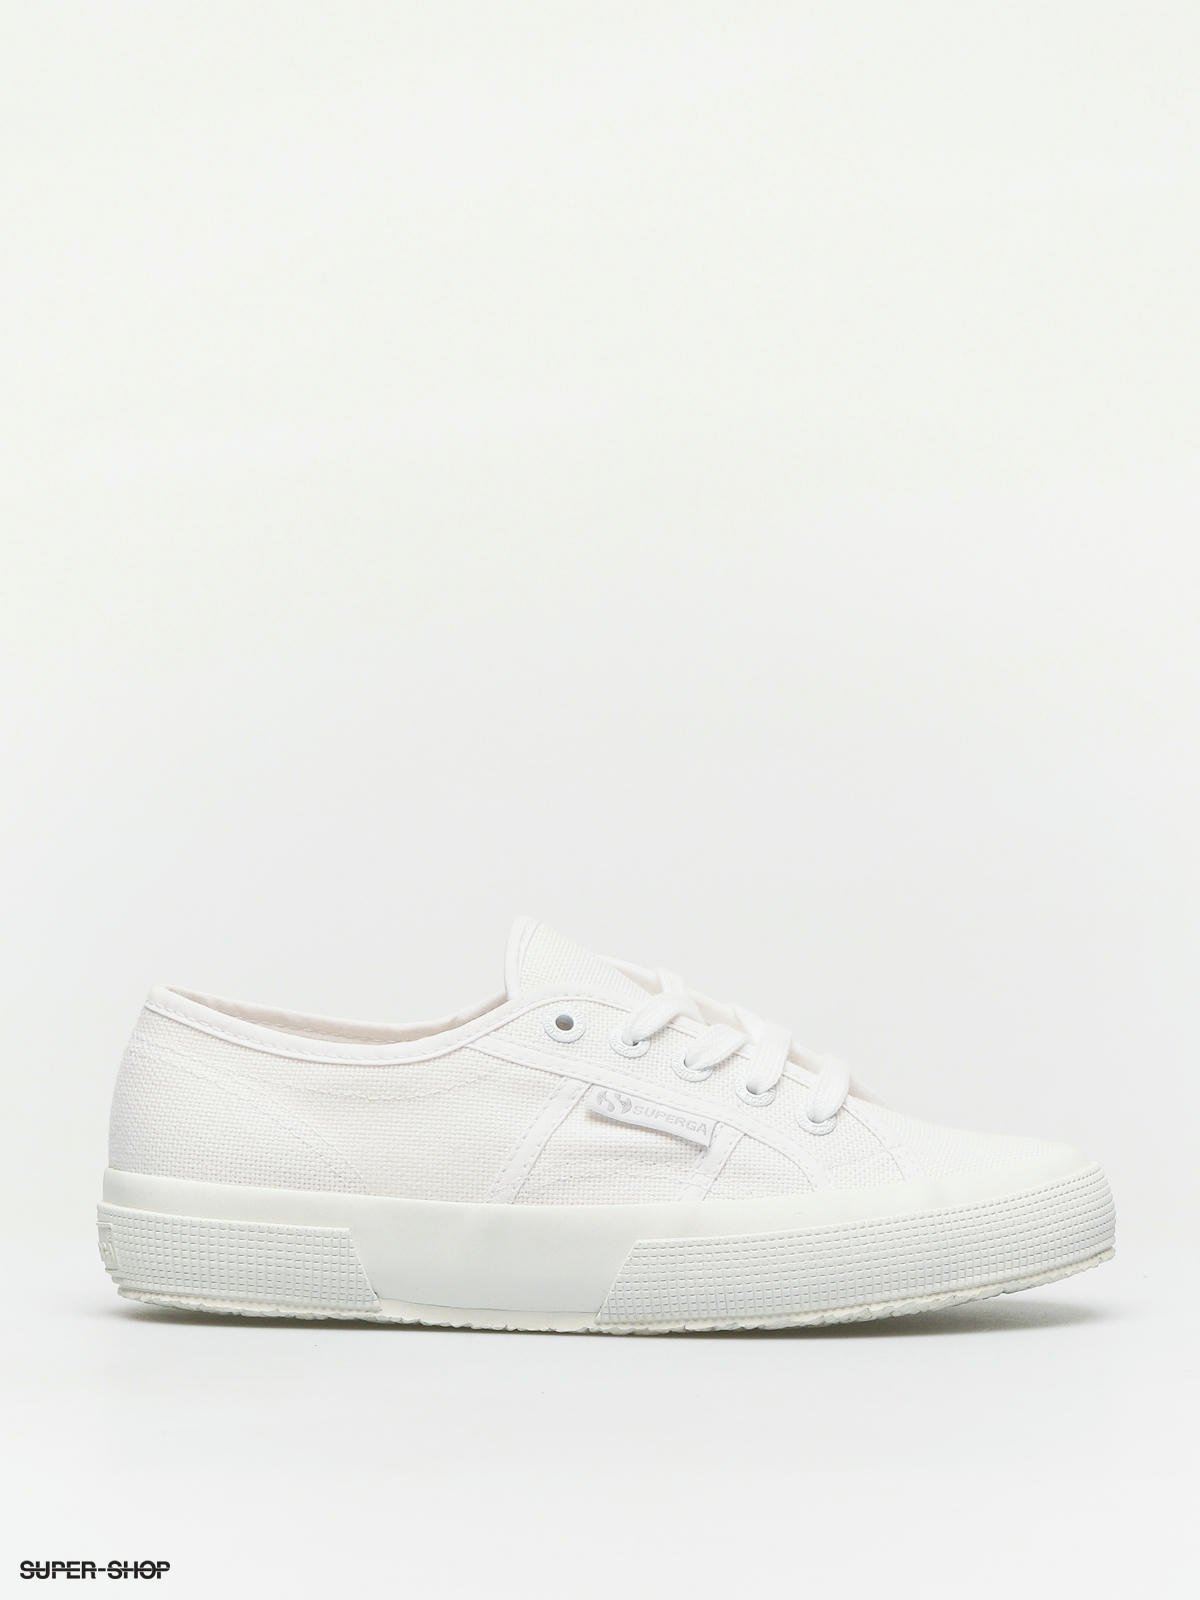 how to clean supergas white